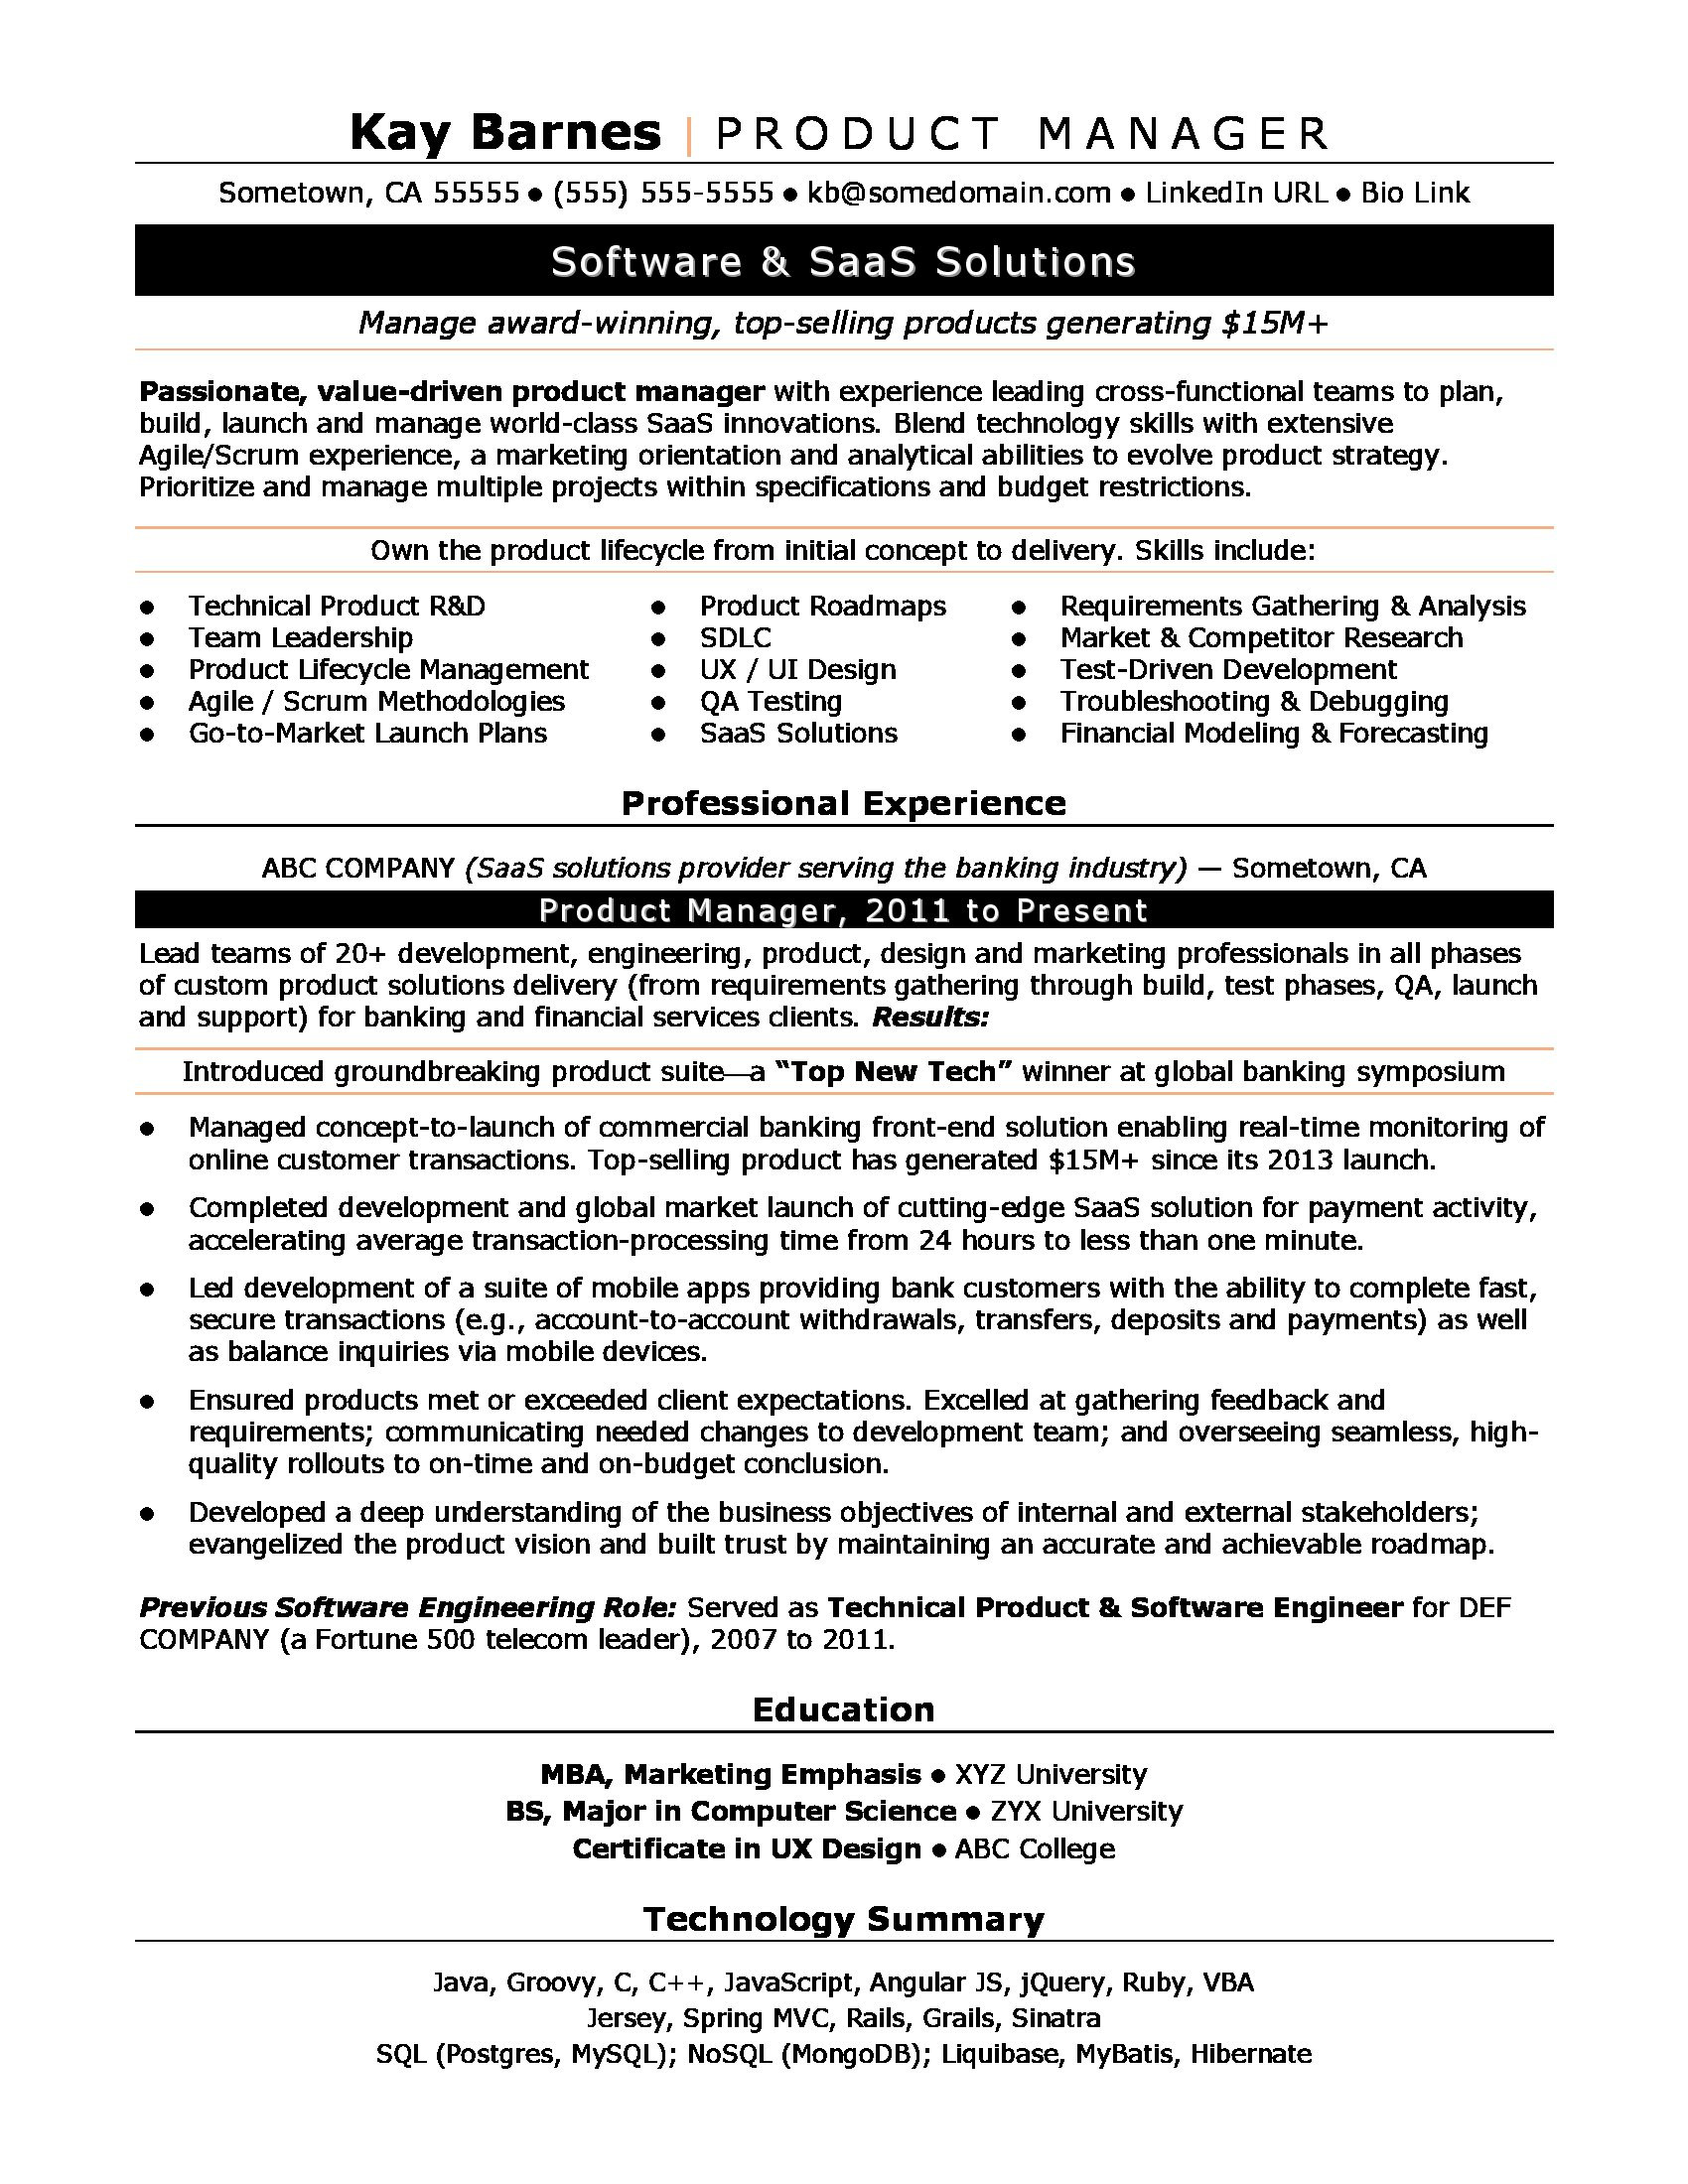 New Product Development Manager Resume Sample Product Manager Resume Sample Monster.com